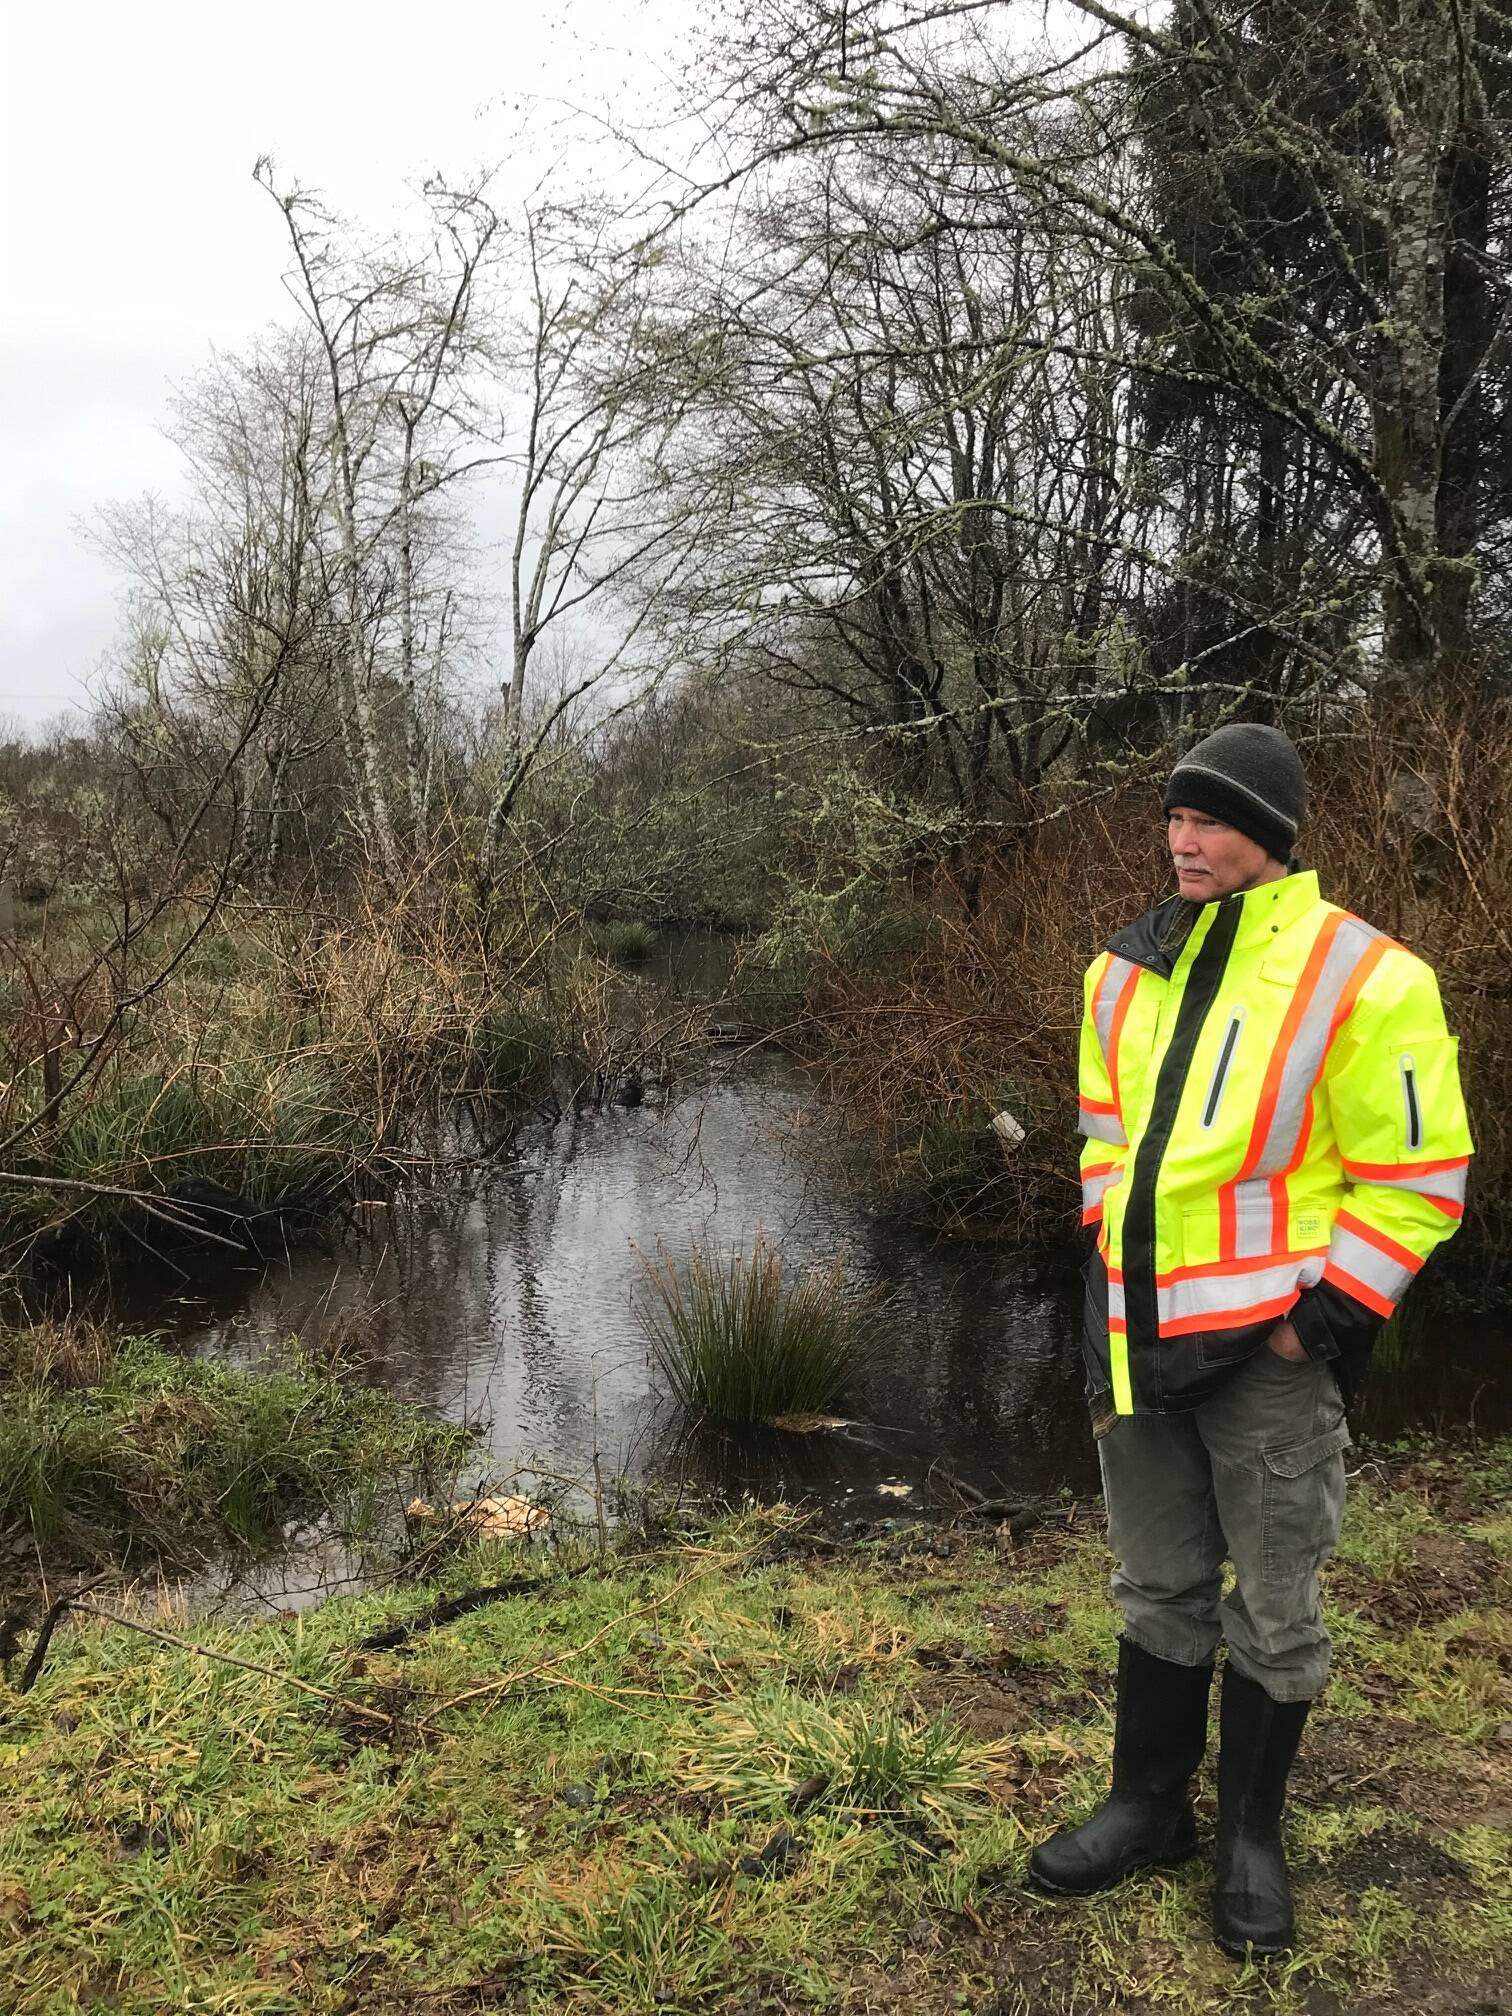 Ocean Shores City Planner Marshall Read joined Monday's inspection of the Oyehut Ditch to discuss next steps for the project. Photo courtesy of Scott Andersen